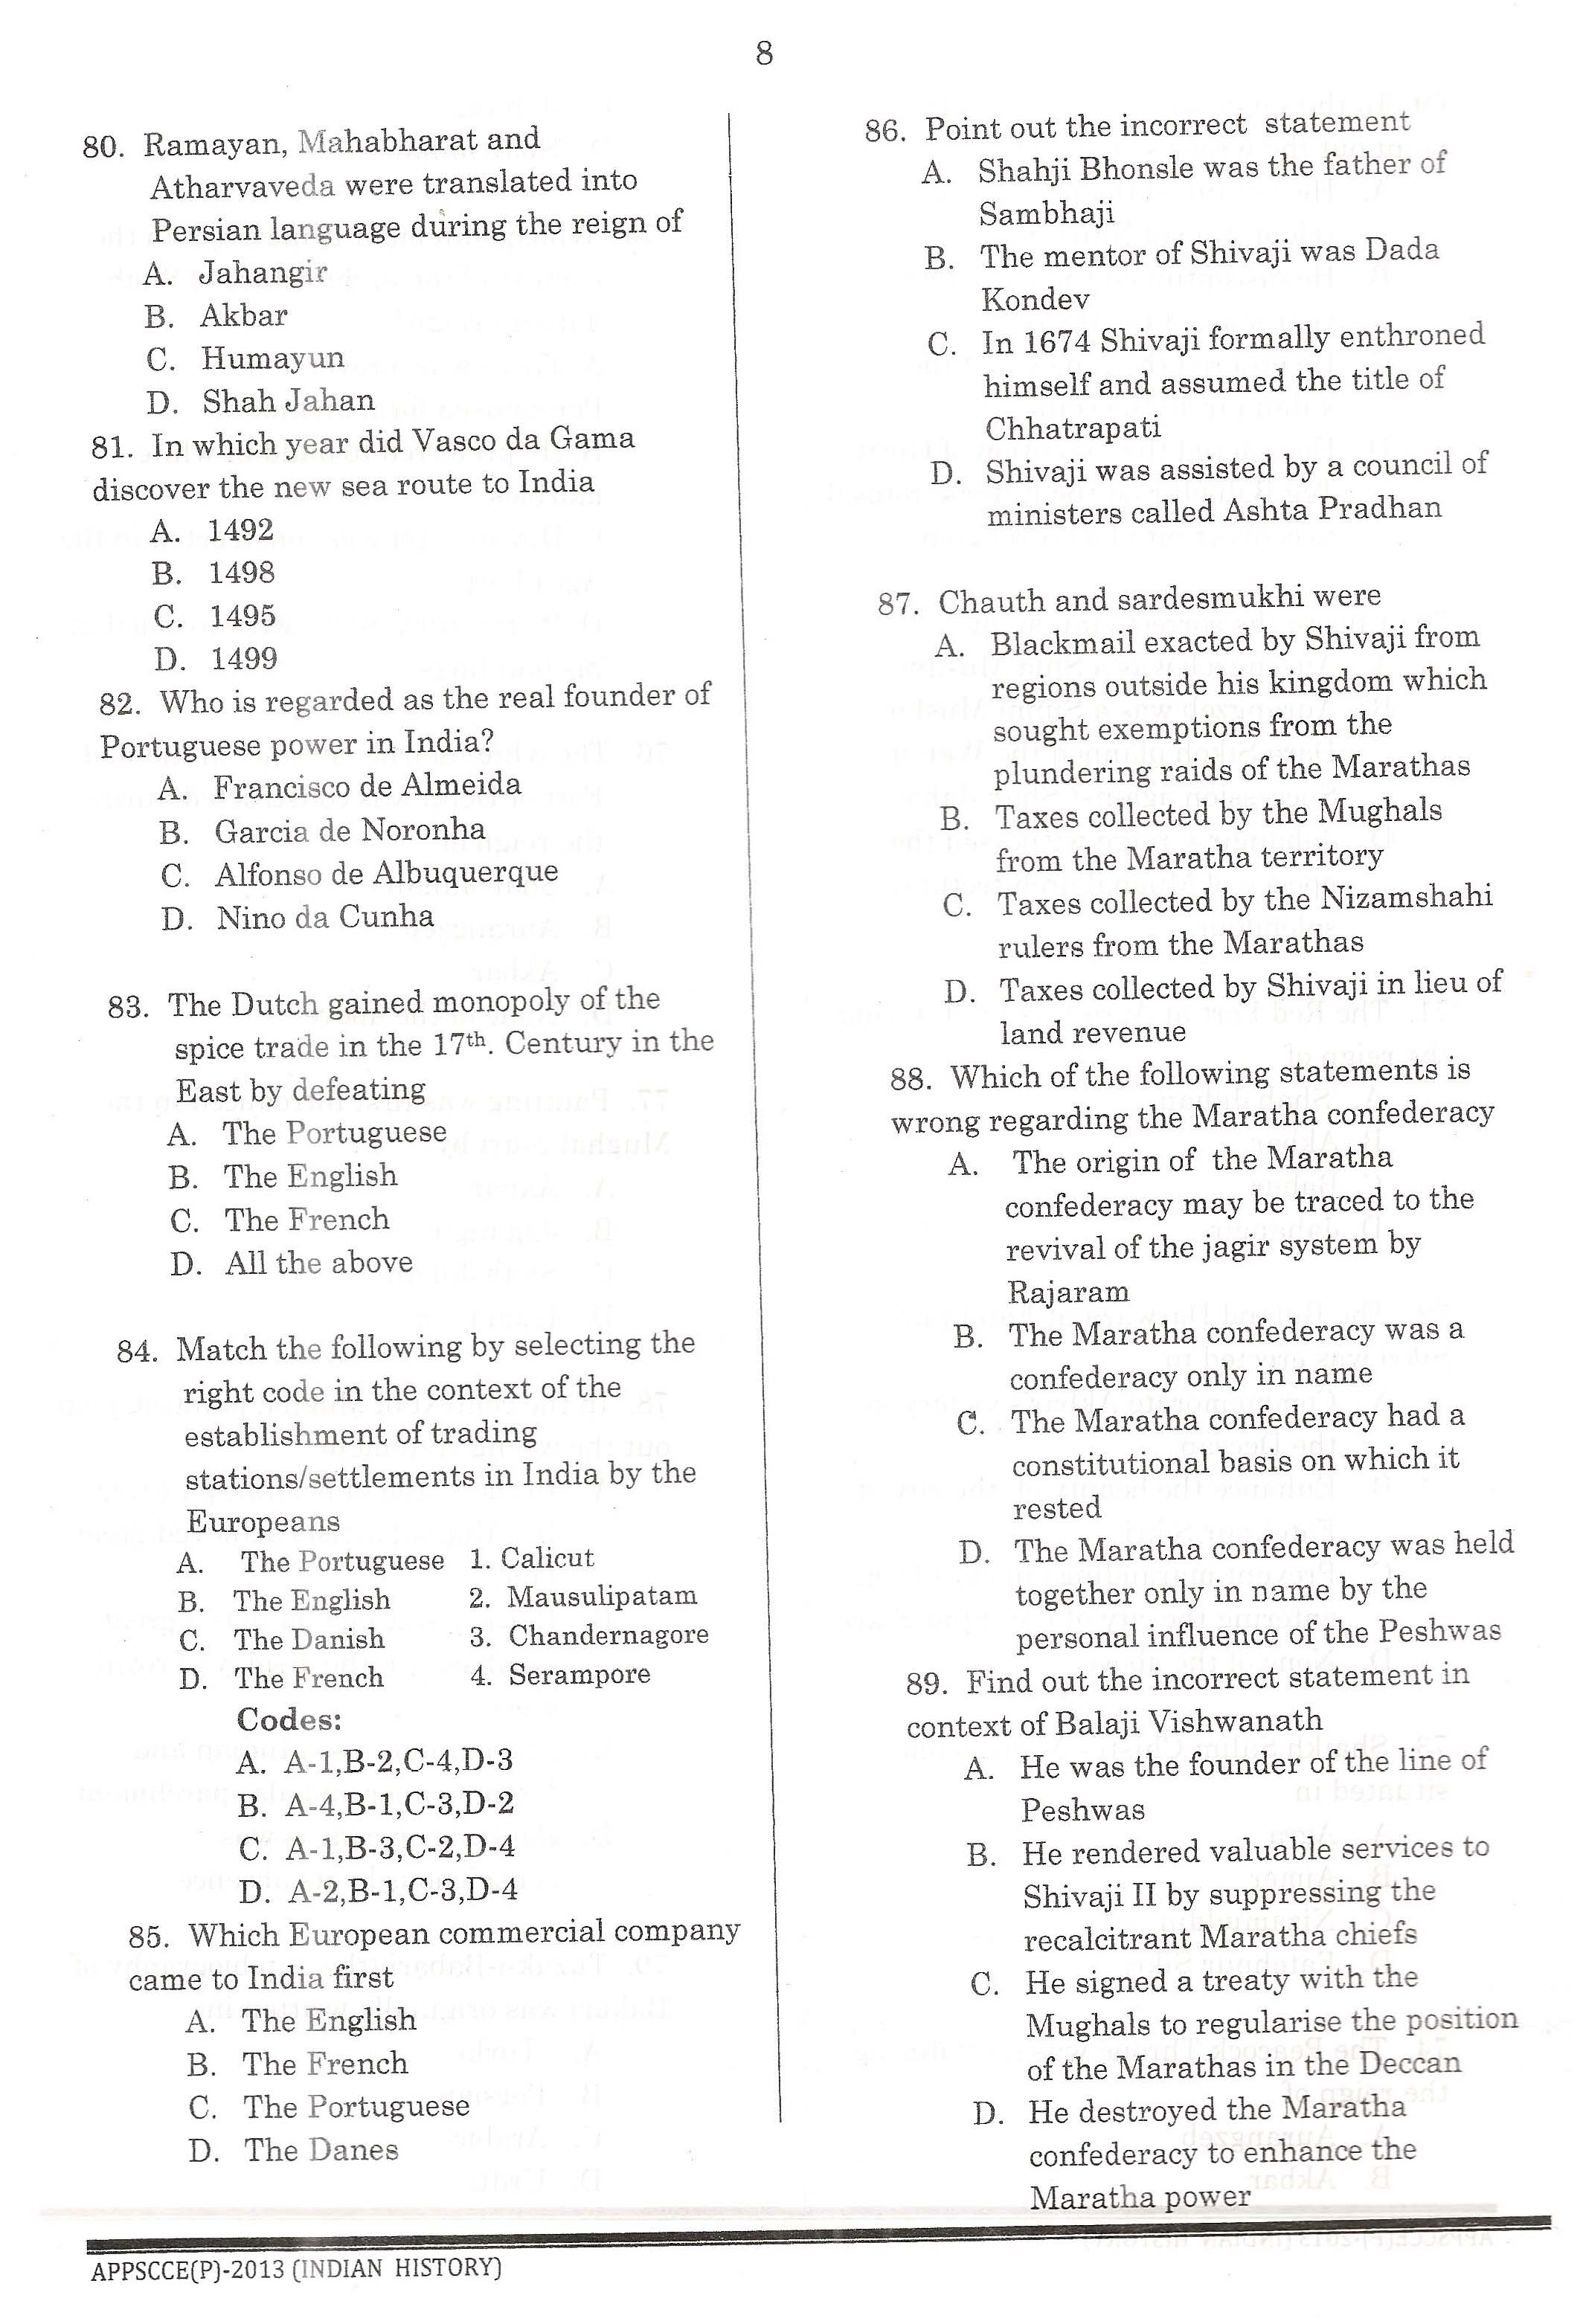 APPSC Combined Competitive Prelims Exam 2013 Indian History 9